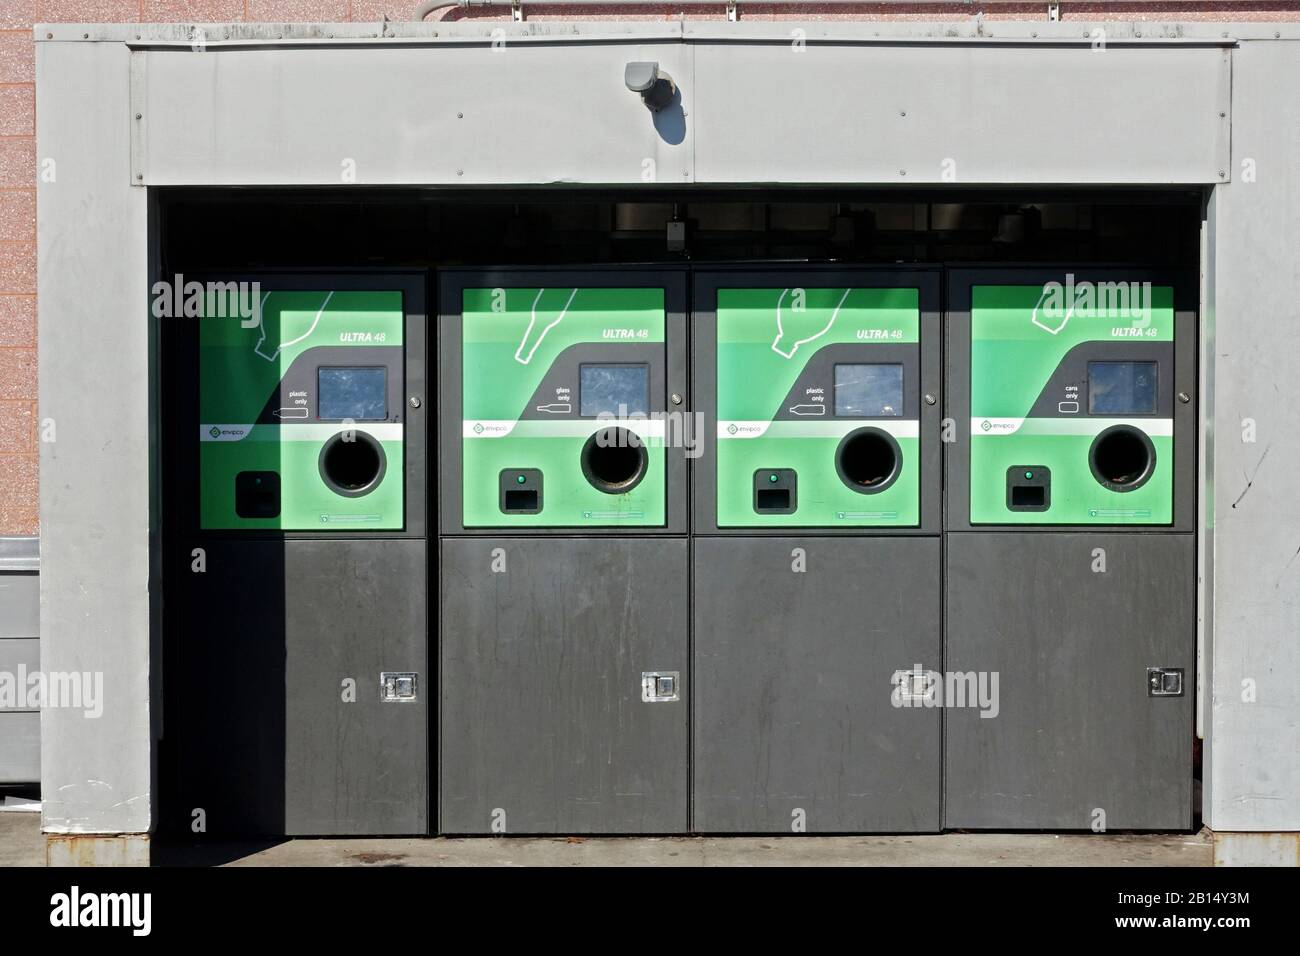 Automated deposit bottle & can return machines in the College Point Center Mall, College Point, Queens, New York Stockfoto